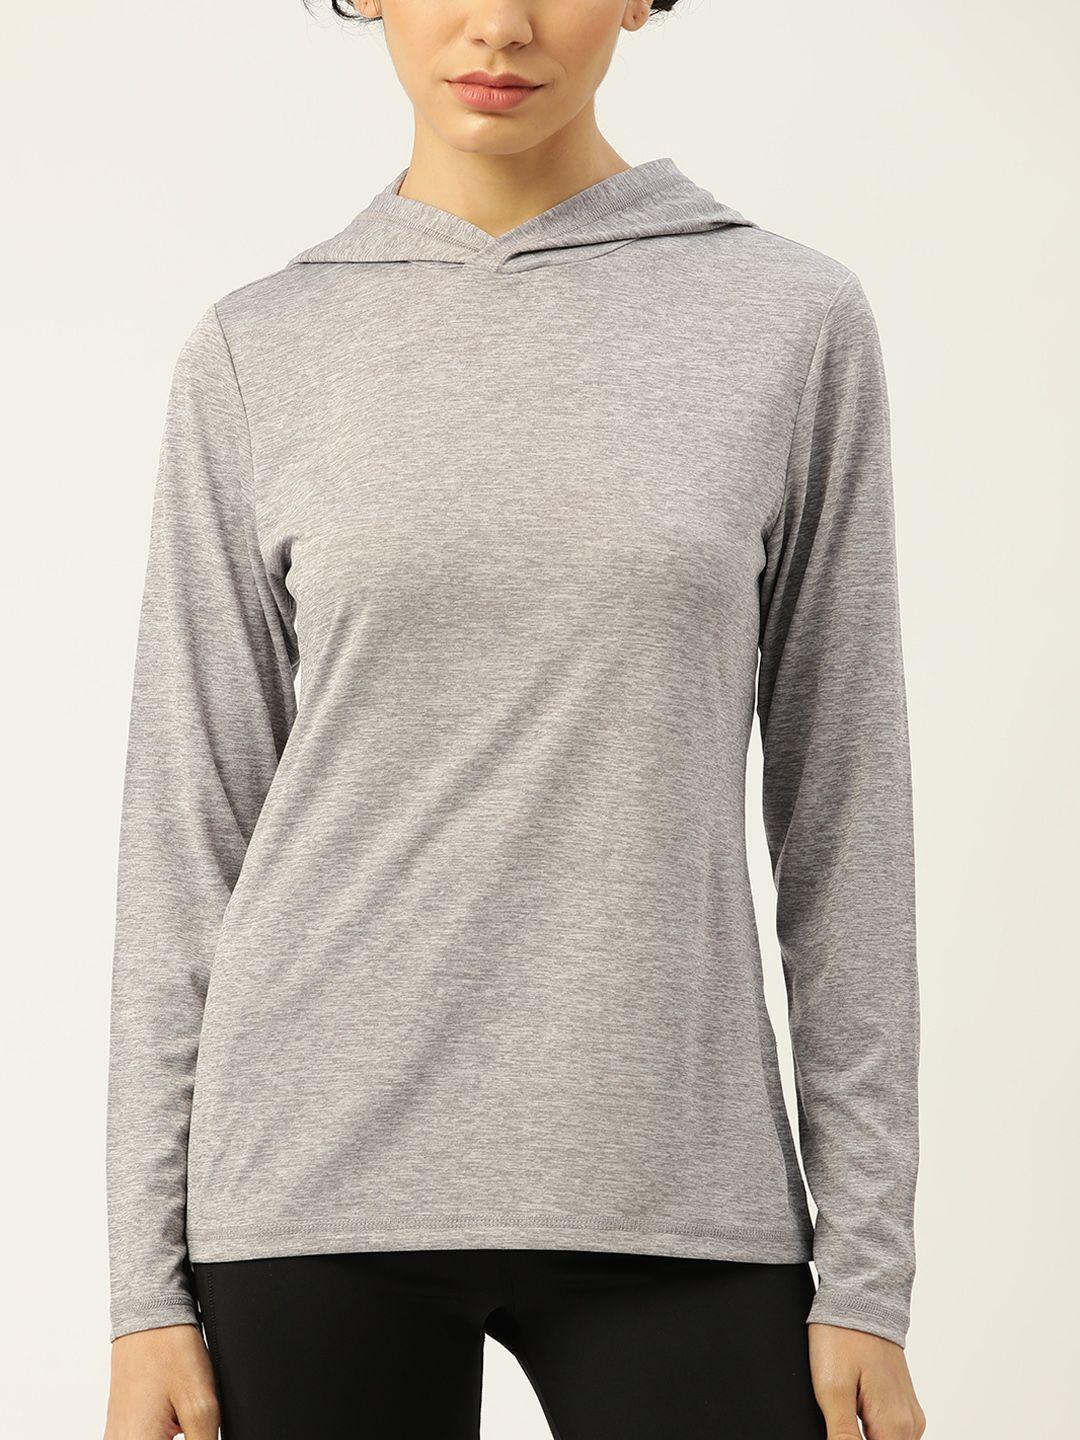 macy's ideology grey melange hooded knitted top